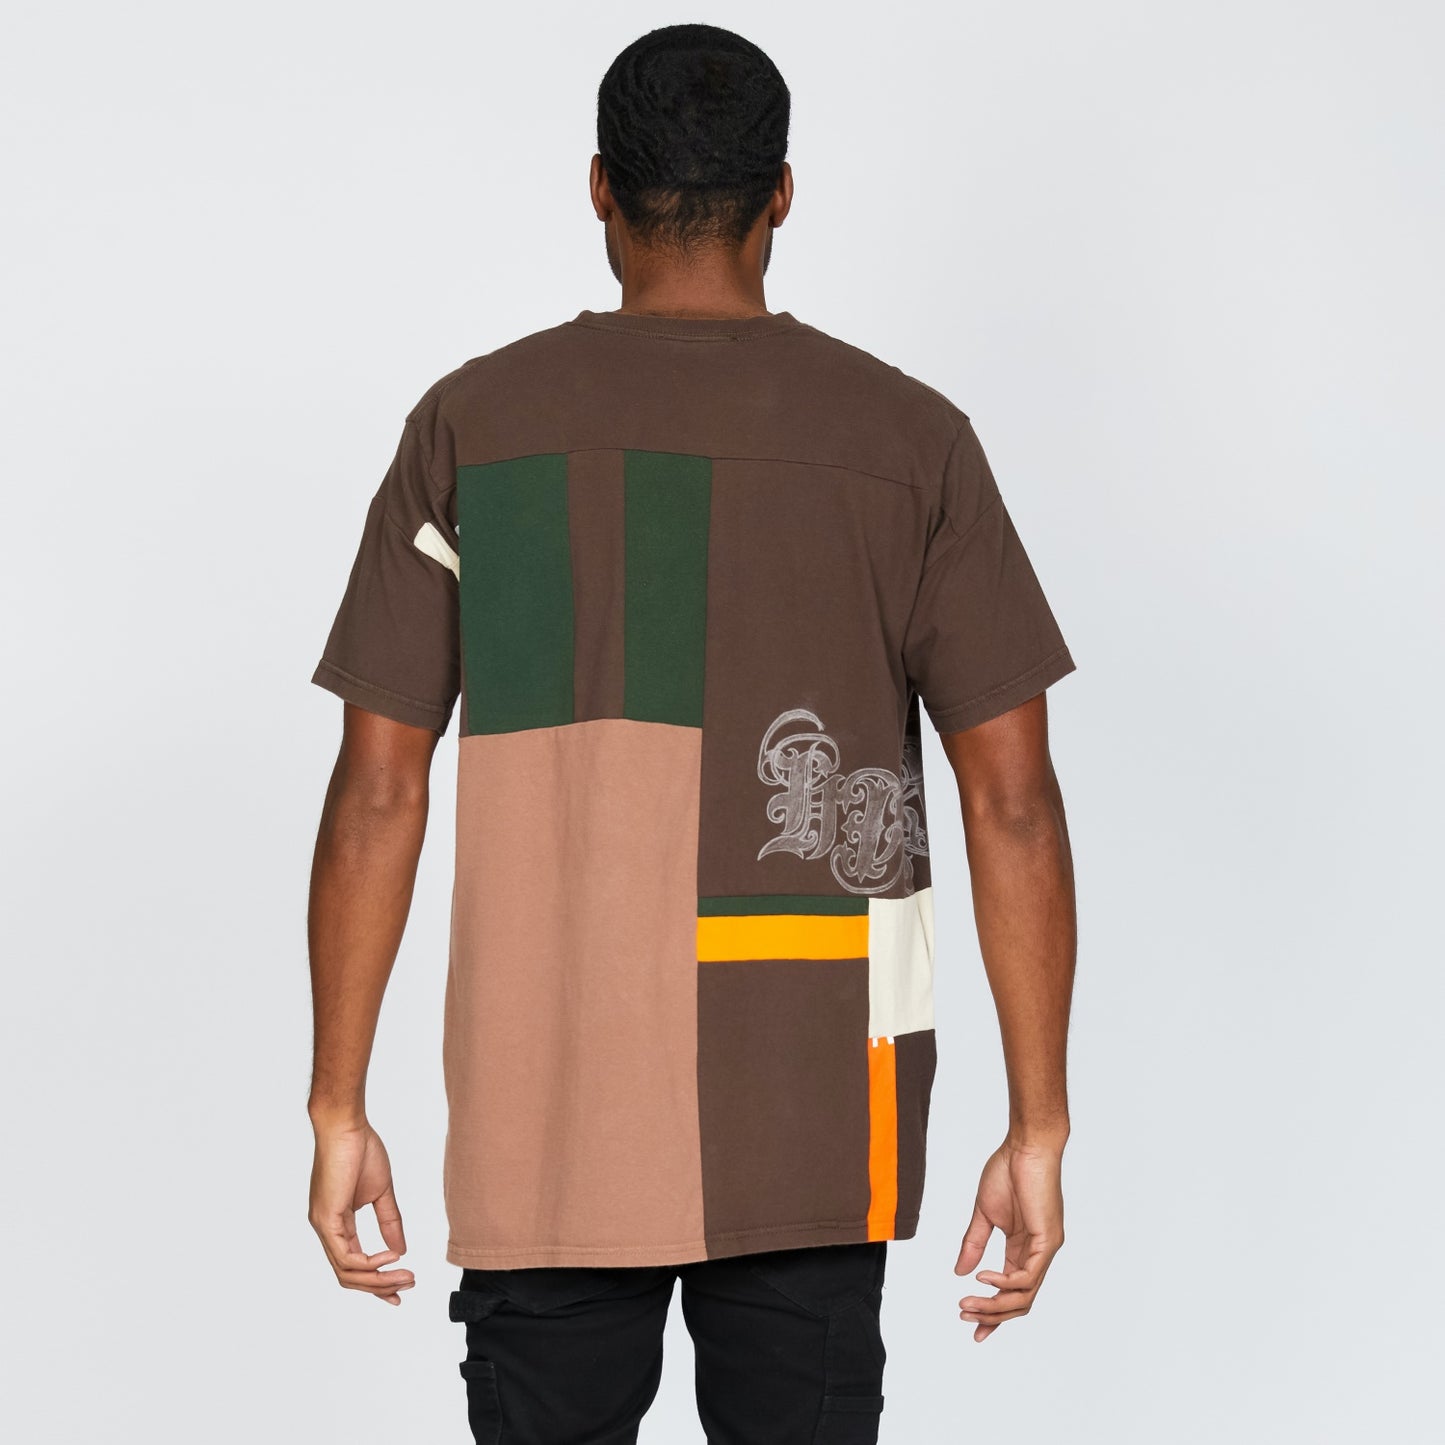 Reclaimed Oversize T-shirt with Pockets in Brown & Creme